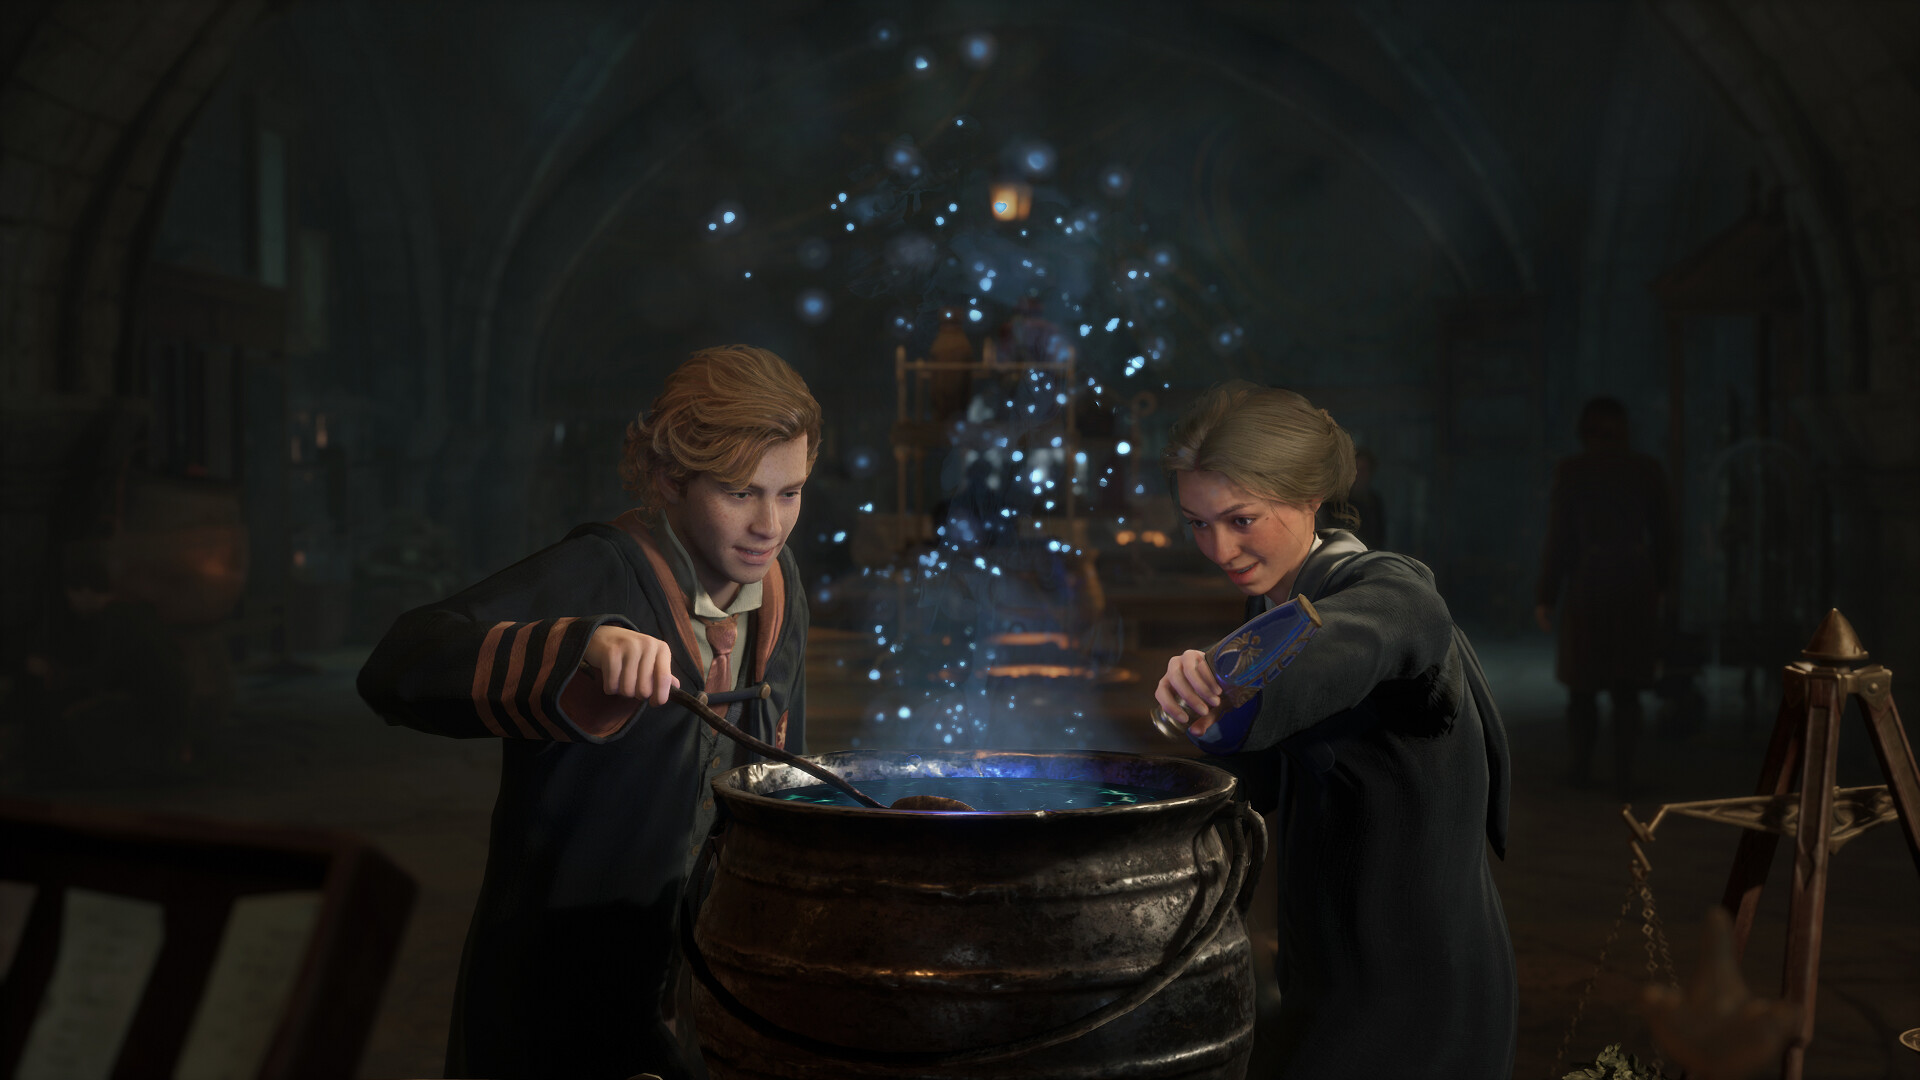 HUGE HOGWARTS LEGACY PC UPDATE - INSANE PC SYSTEM REQUIREMENTS REVEALED! 